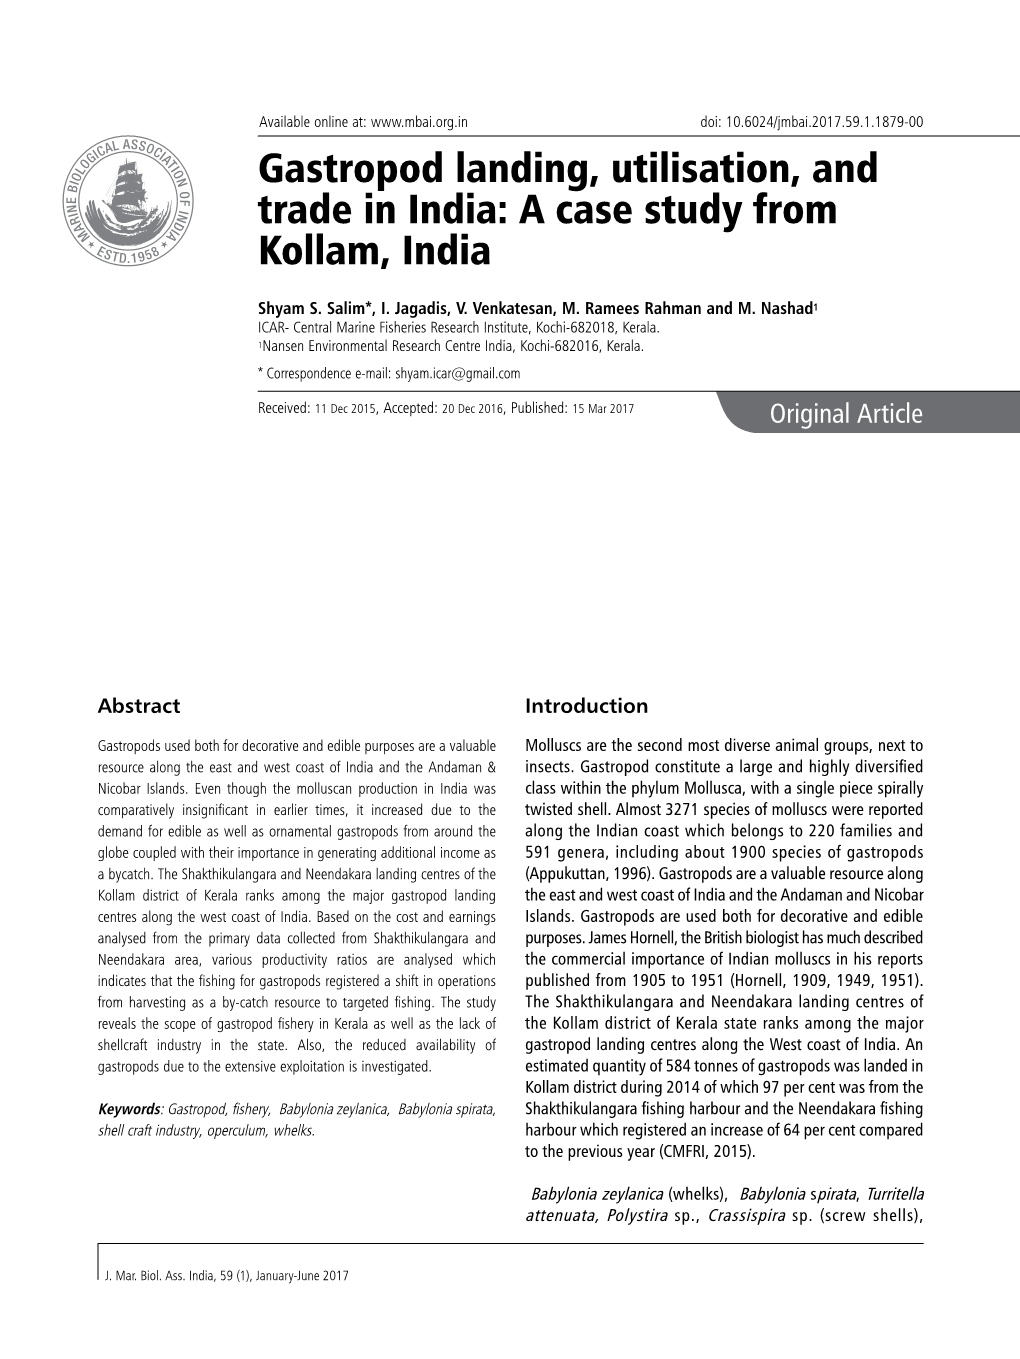 Gastropod Landing, Utilisation, and Trade in India: a Case Study from Kollam, India